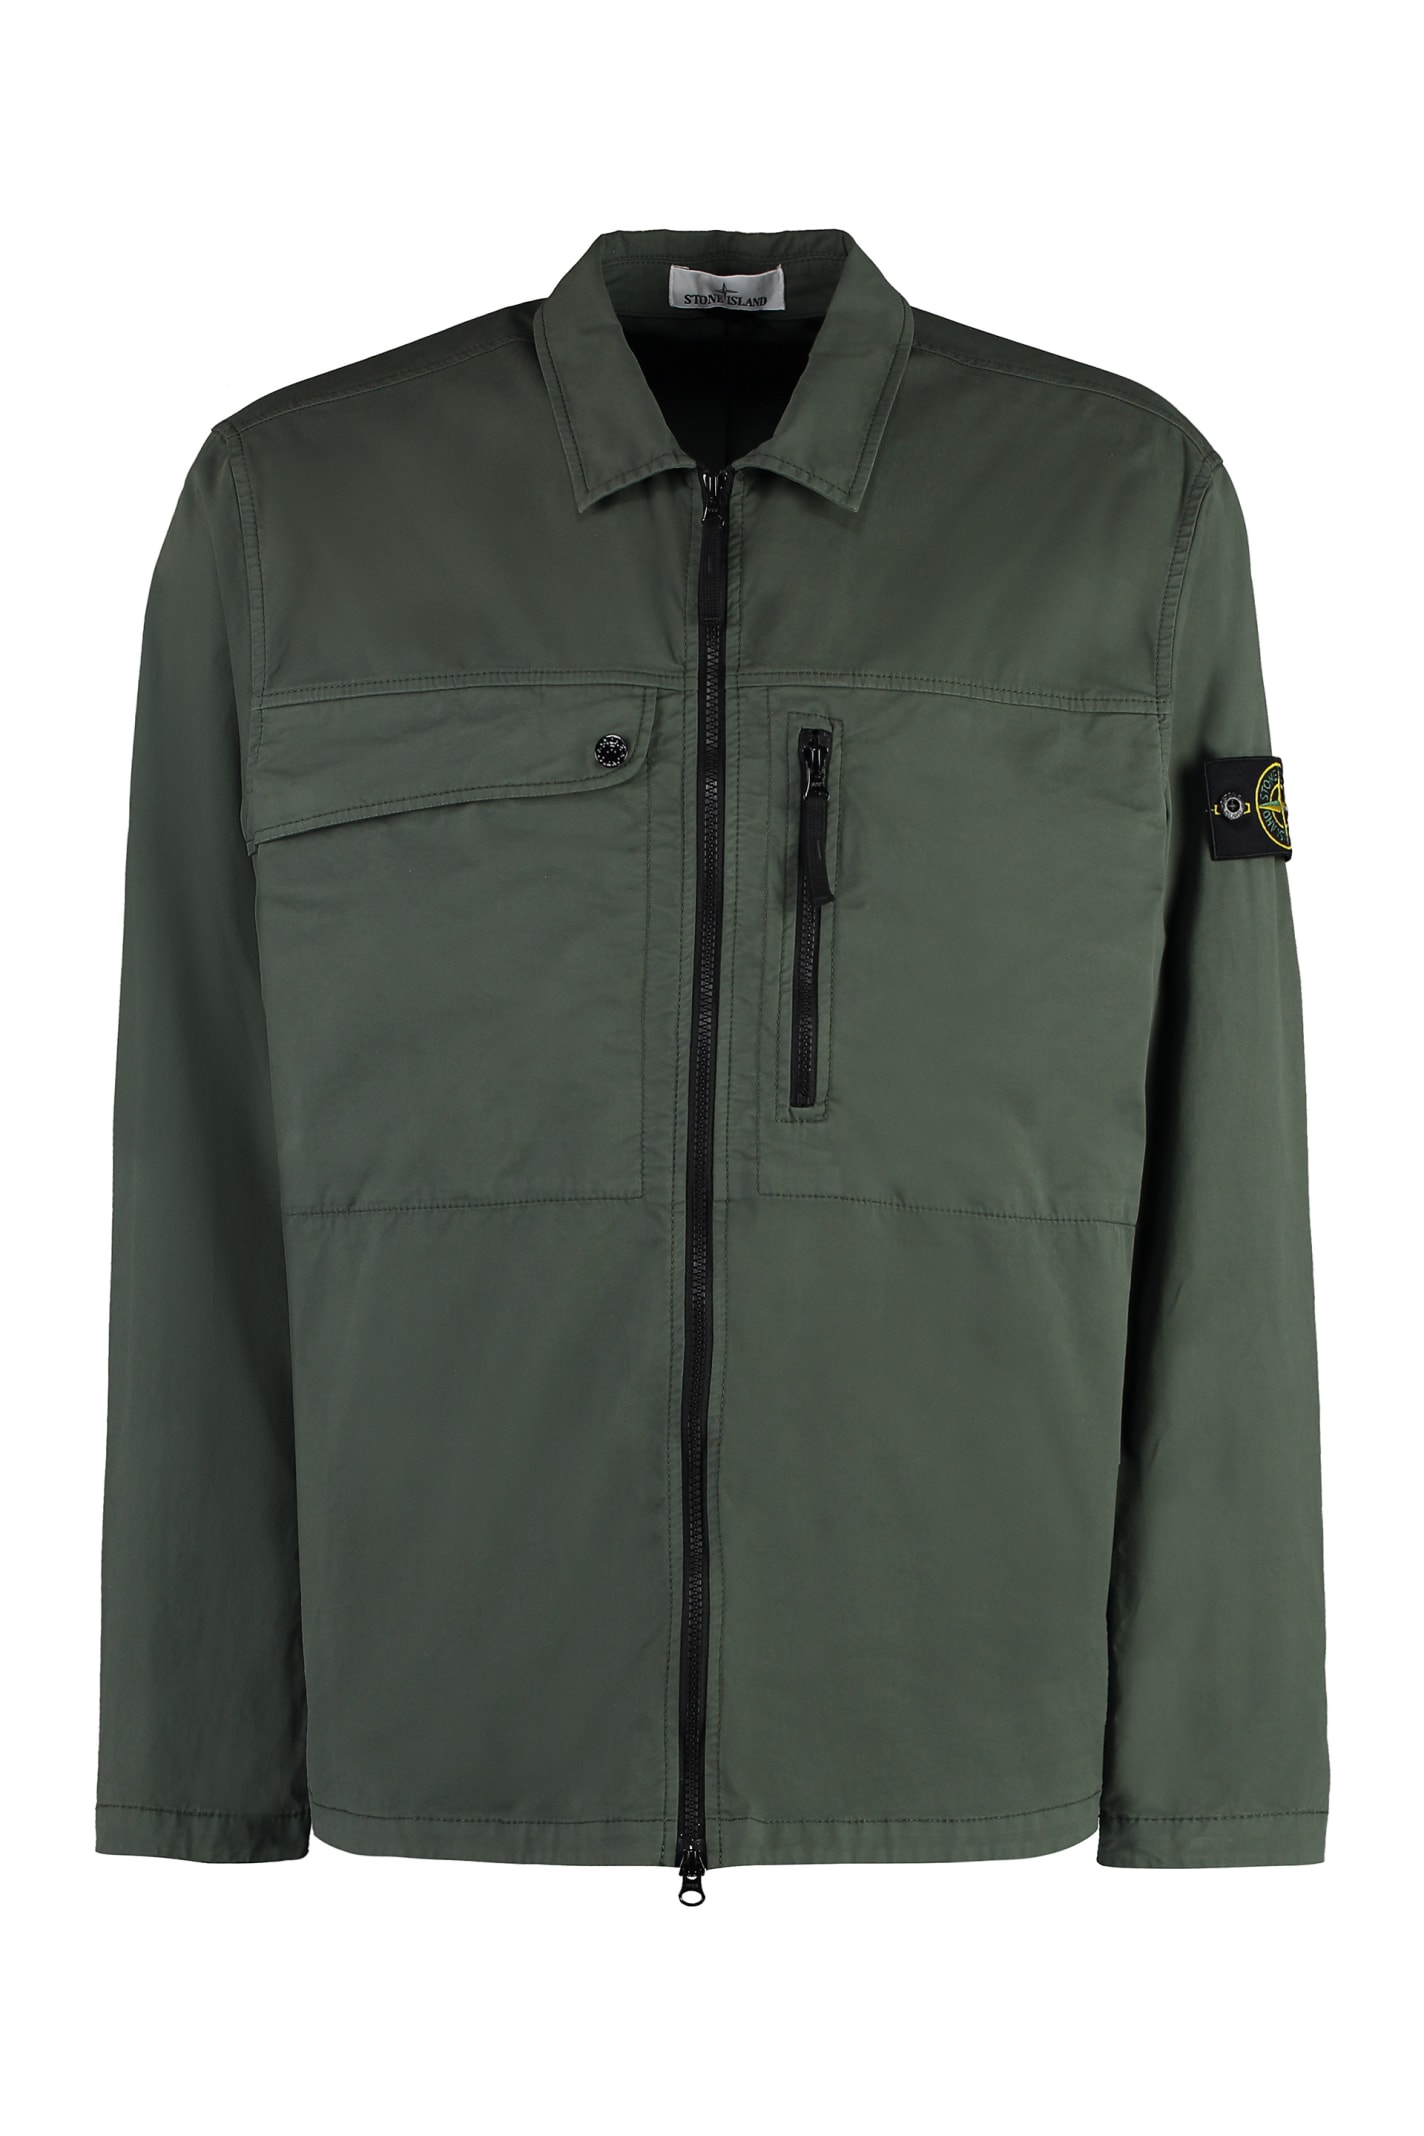 Stone Island Quilted Hooded zip-up Jacket - Farfetch